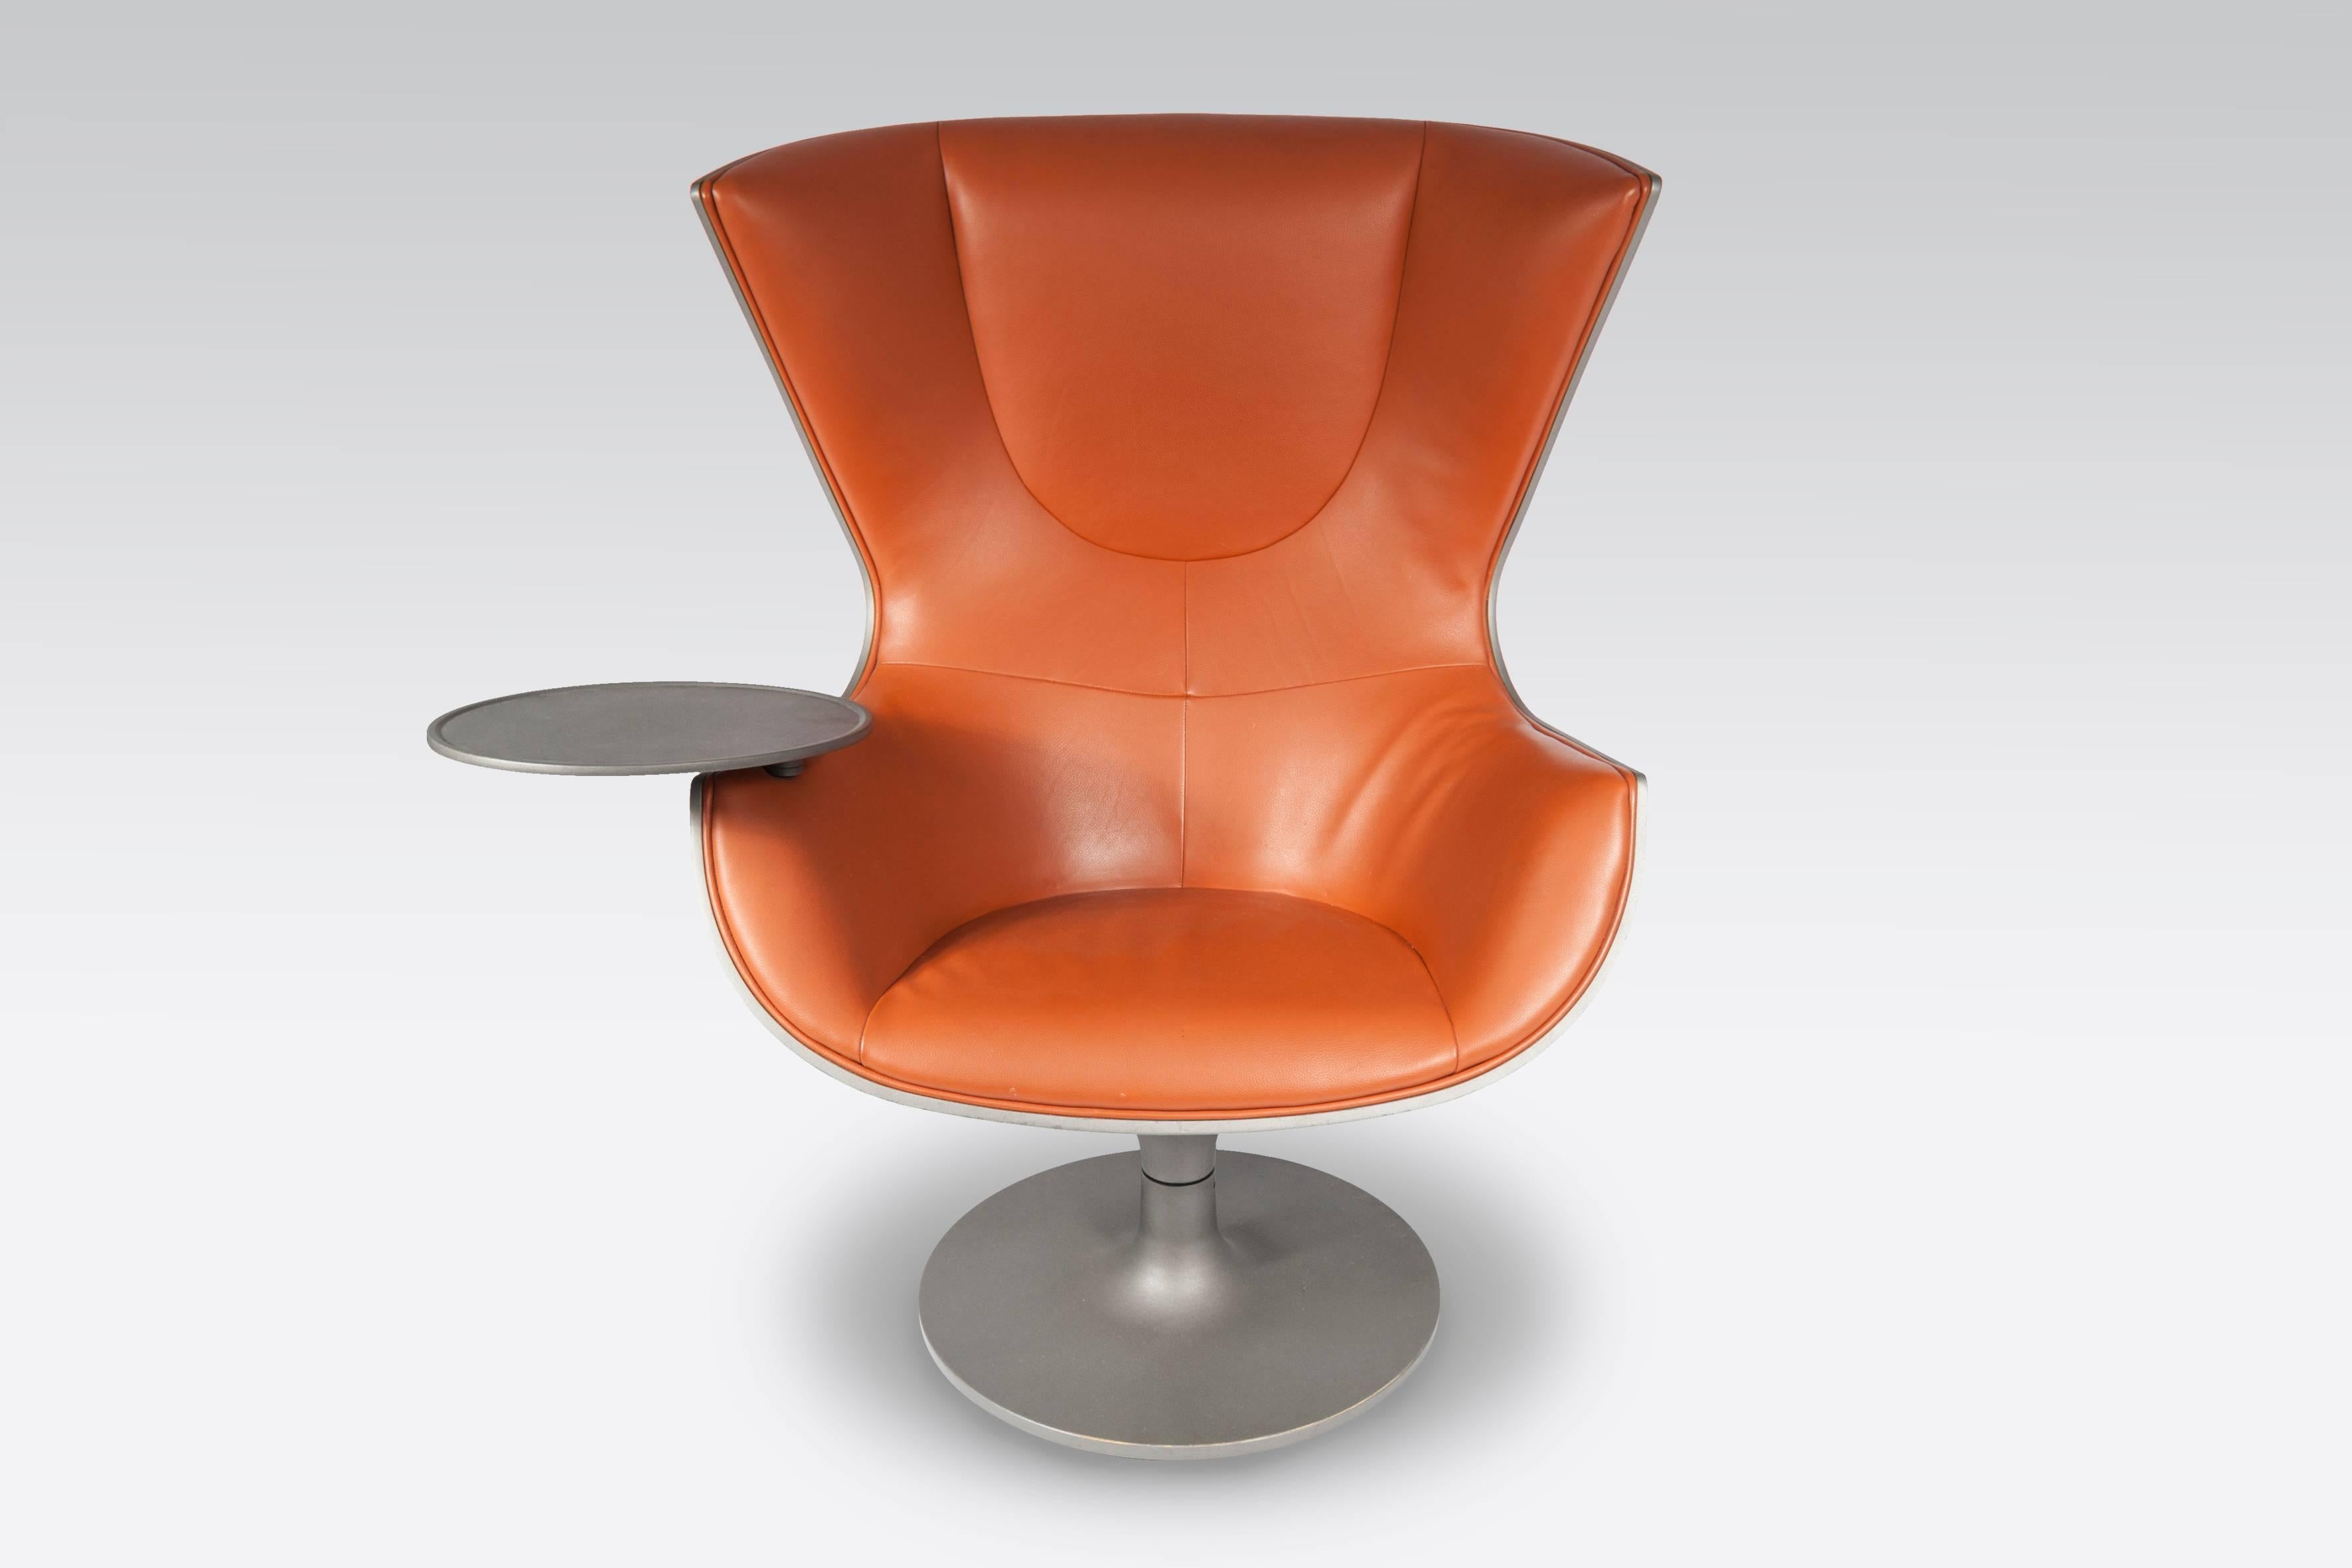 2001 limited edition armchair designed by Philippe Starck (1949) exclusively for Eurostar “premium” first class lounge in Paris (44 units) and in London (66 units).
Created with Hermès fashionable brown leather and polymer. Edition